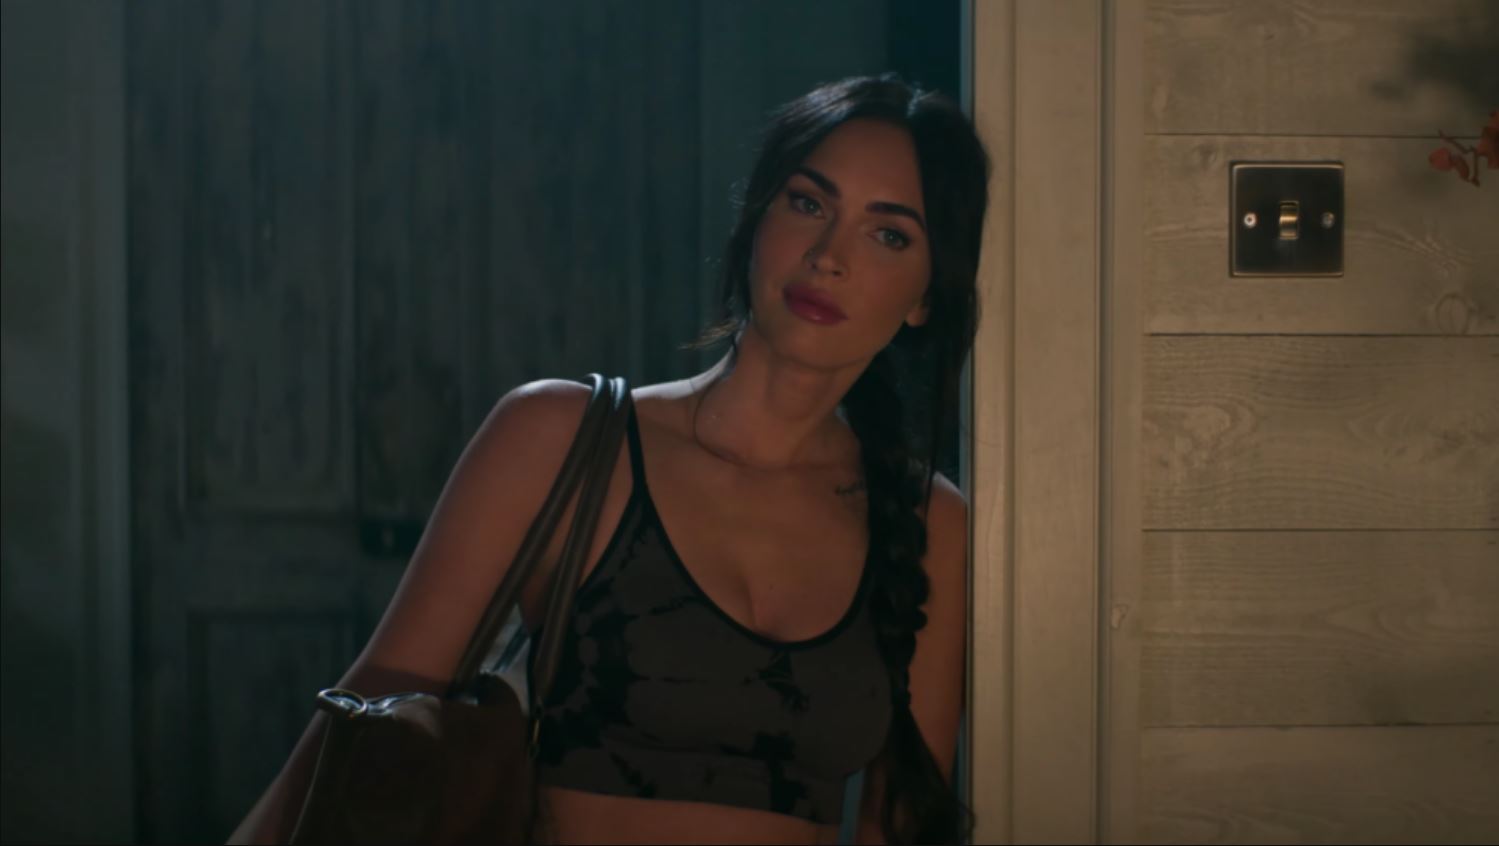 megan fox in the trailer for the expendables 4